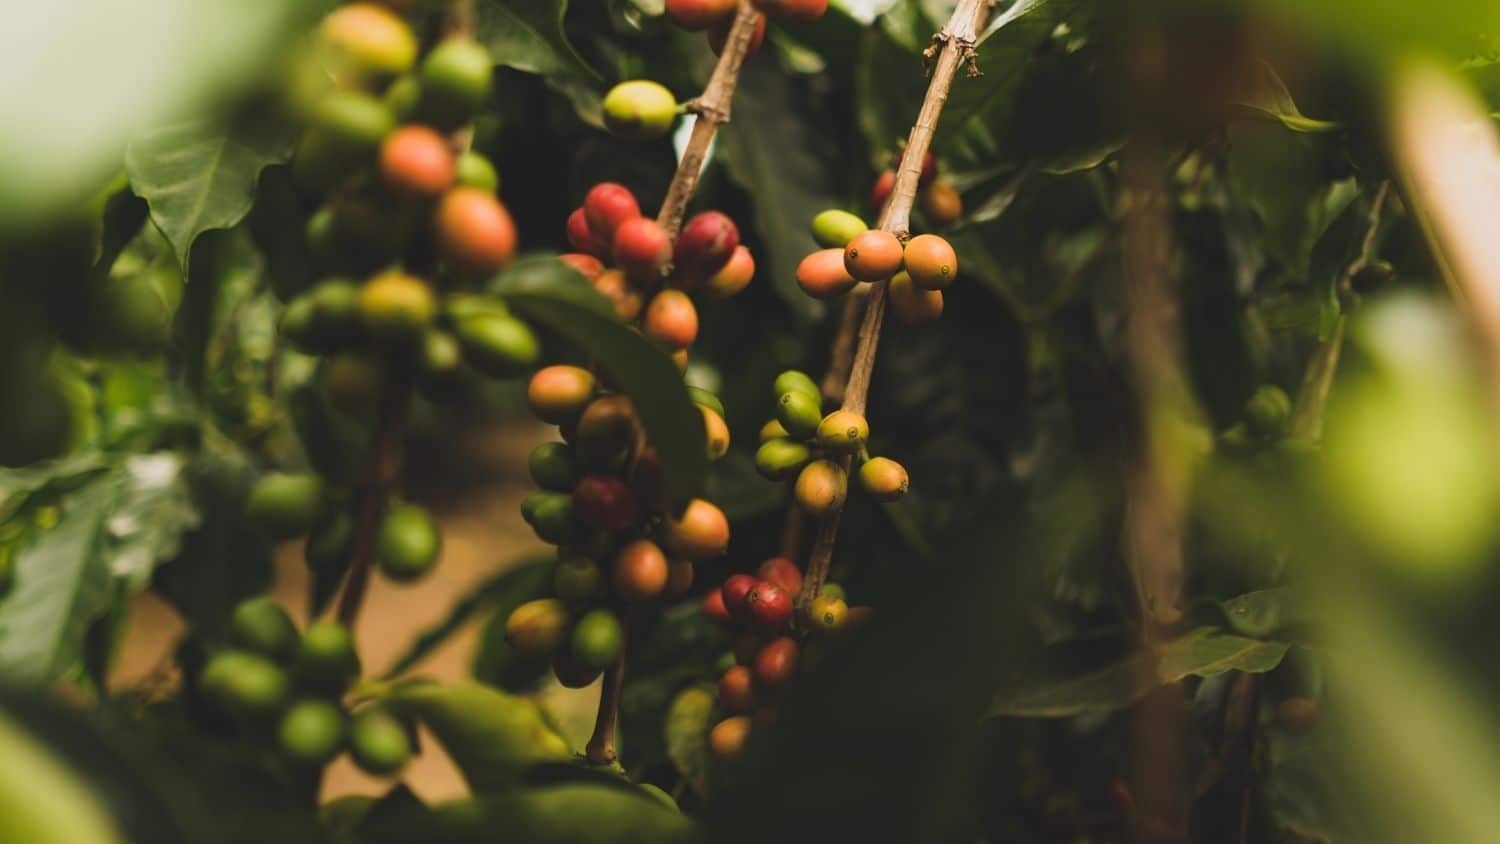 Coffee tree - Many Nonprofits, Companies Report Using Commercial Species in Tree Planting Projects - Forestry and Environmental Resources Department at NC State